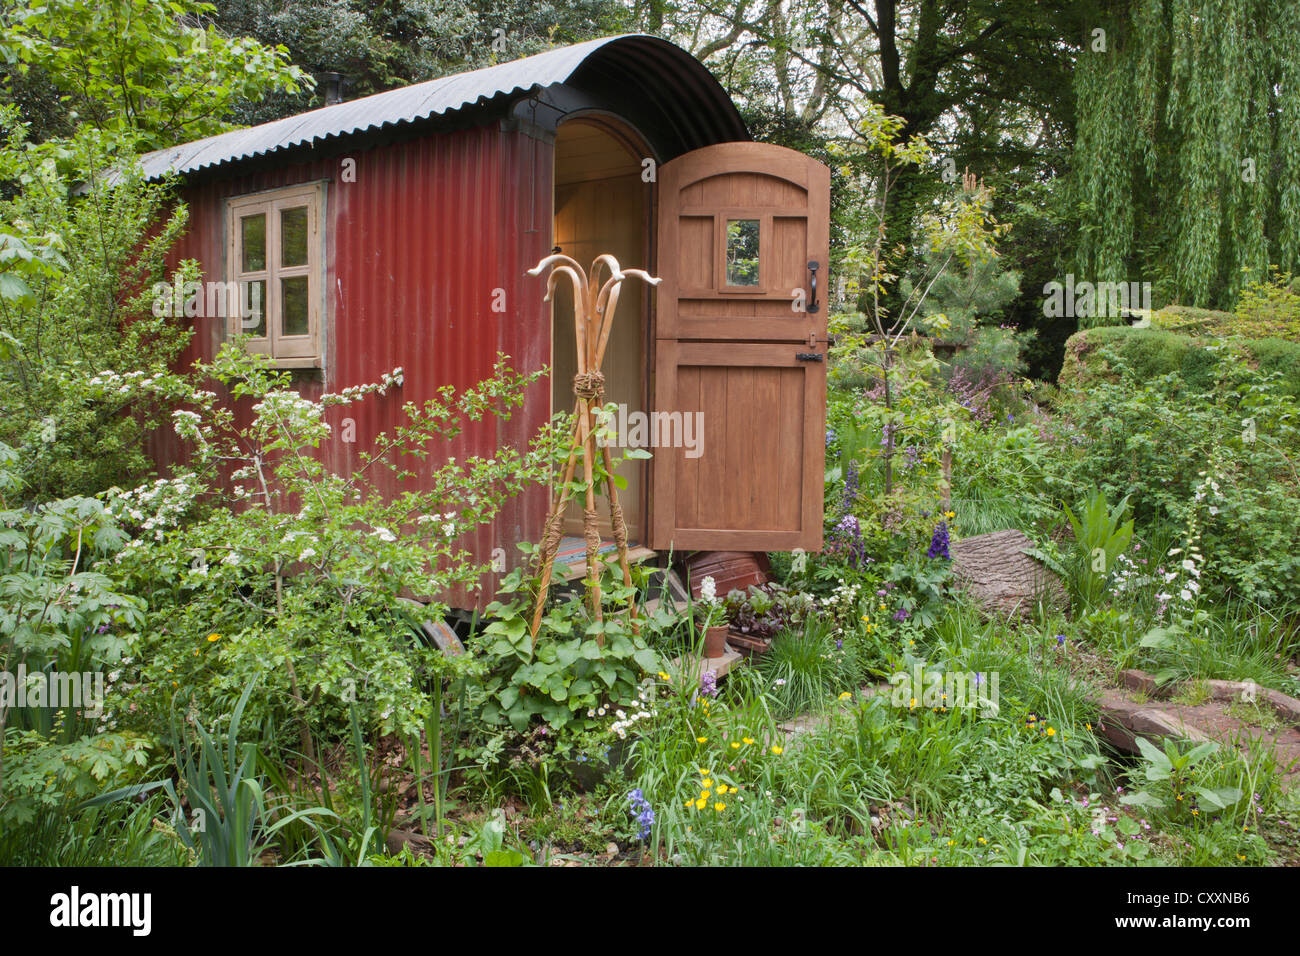 A sustainable eco friendly wildlife garden with shepherds hut cabin retreat in a woodland woods with wildflowers Spring summer UK chelsea flower show Stock Photo